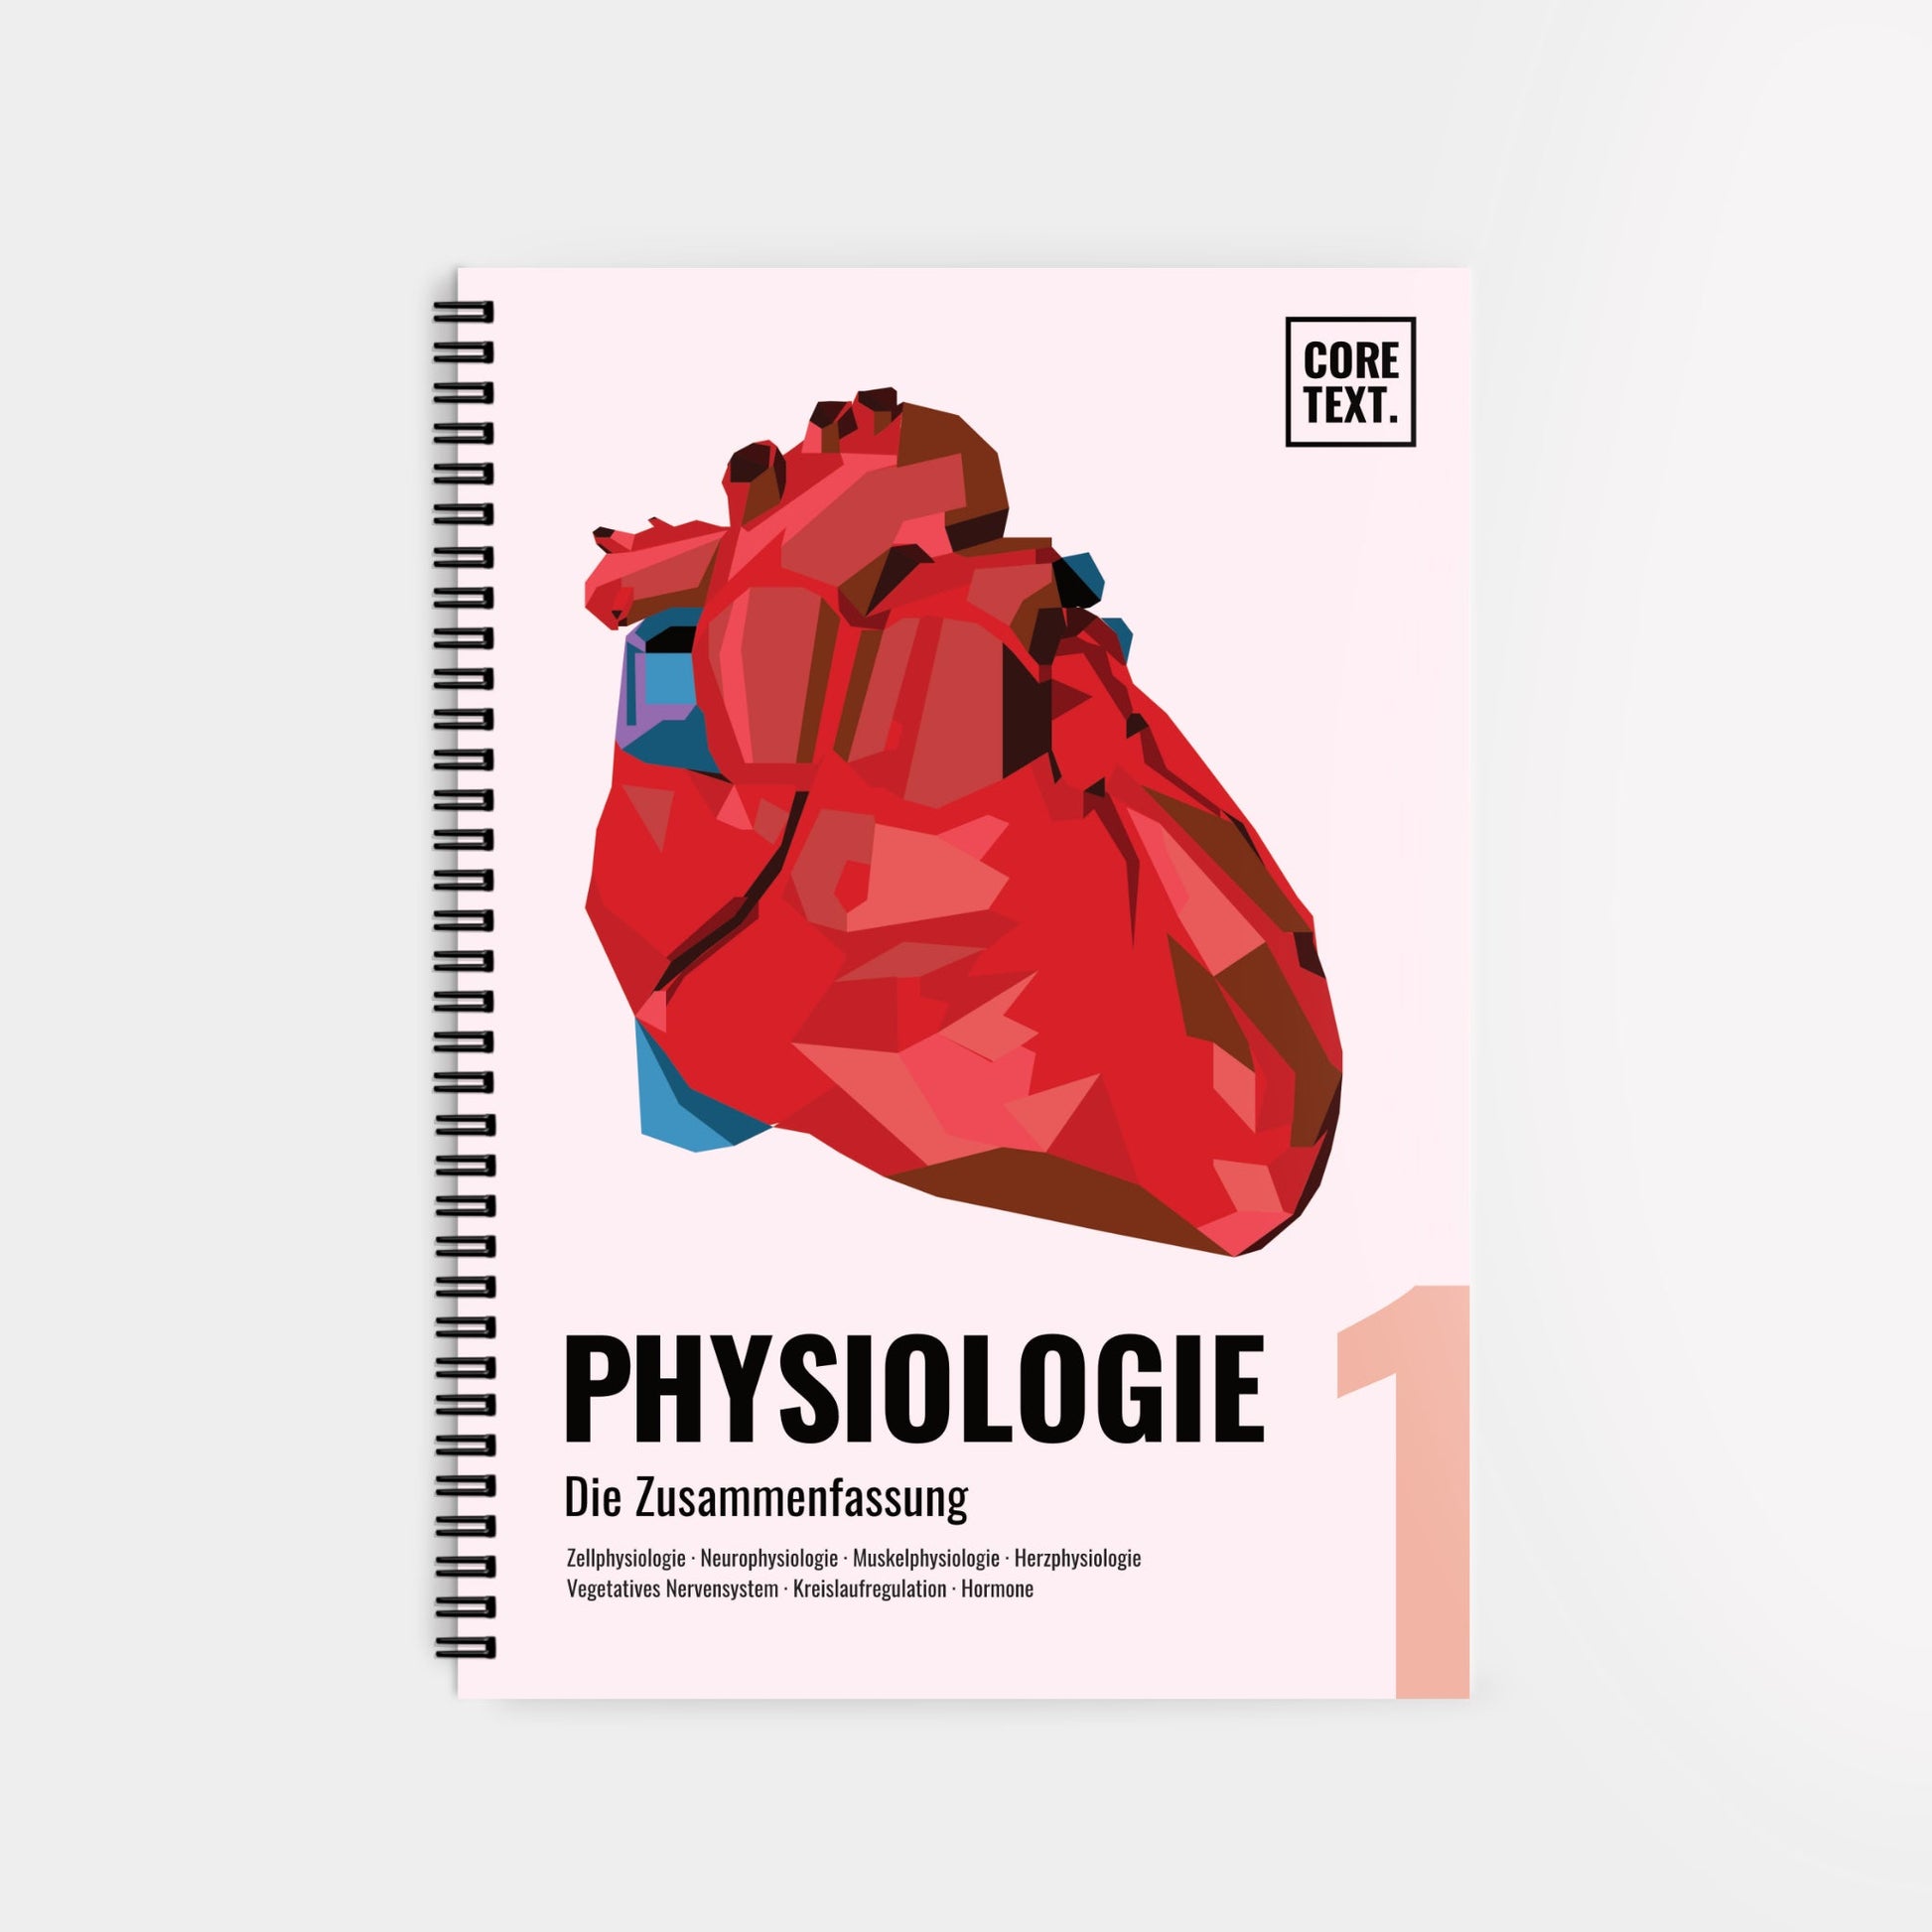 Physiologie 1 - CORETEXT